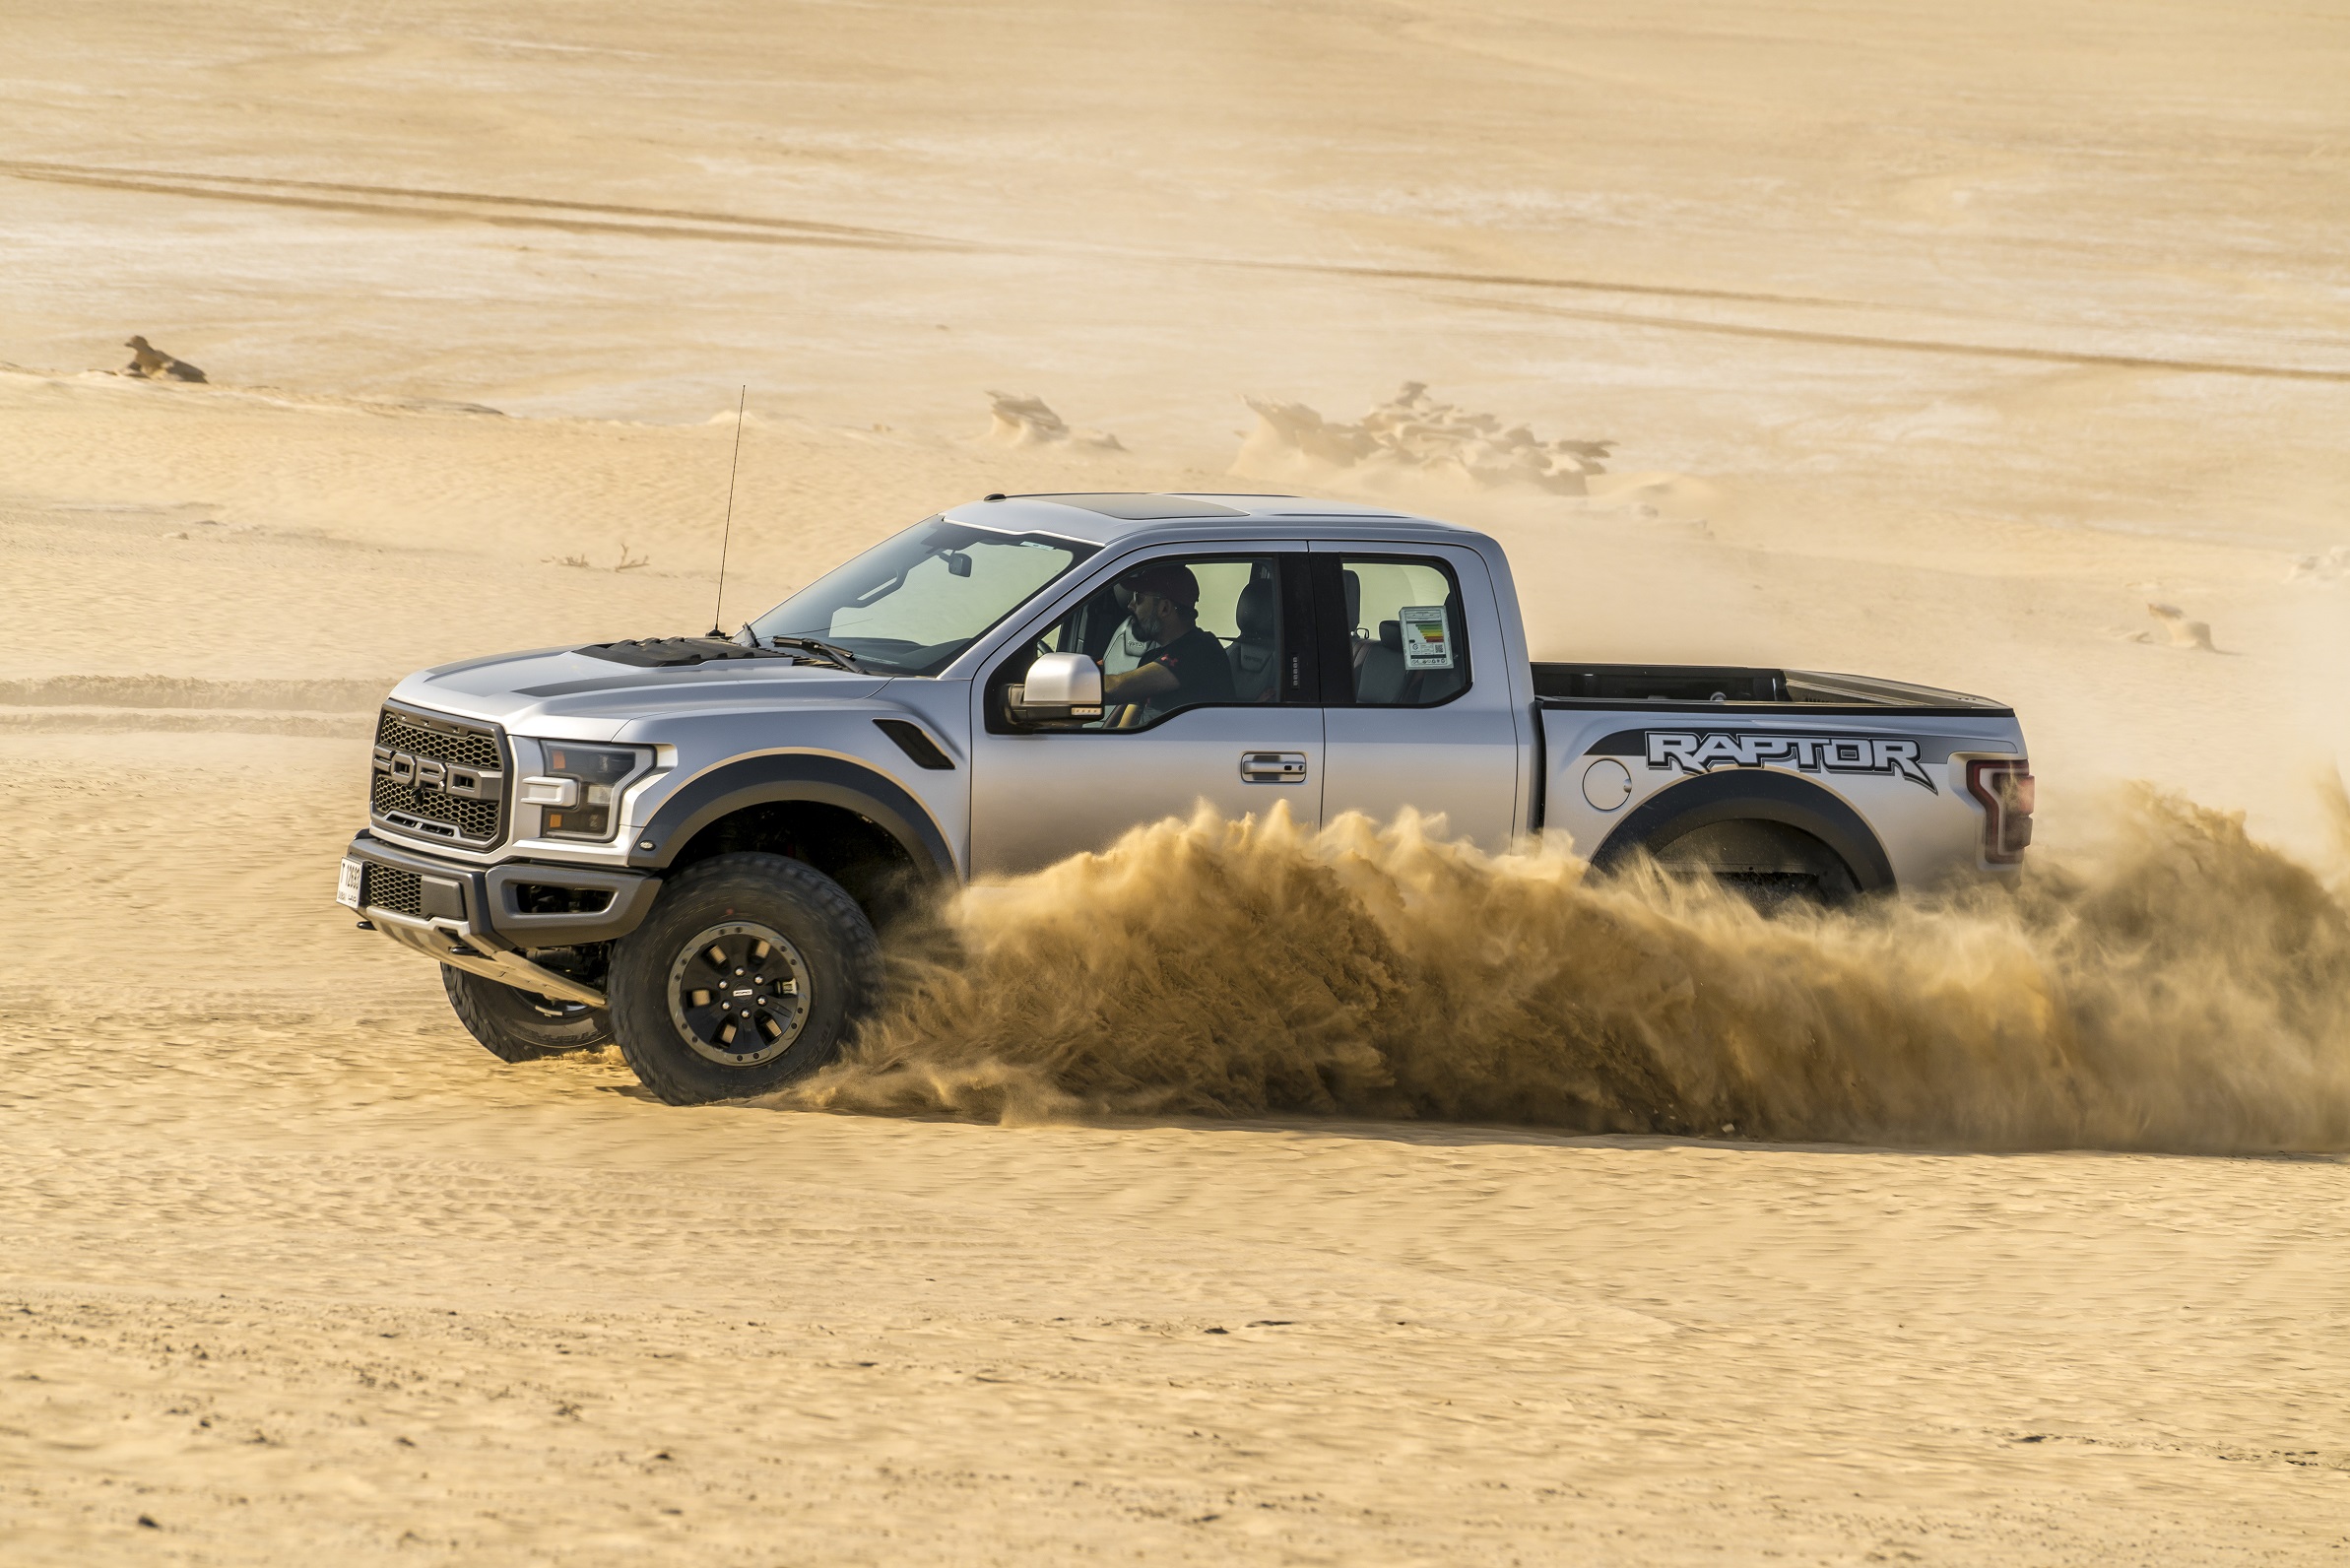 Raptor's All-New Terrain Management System Enabled by Cutting-Edge AWD/4WD Transfer Case